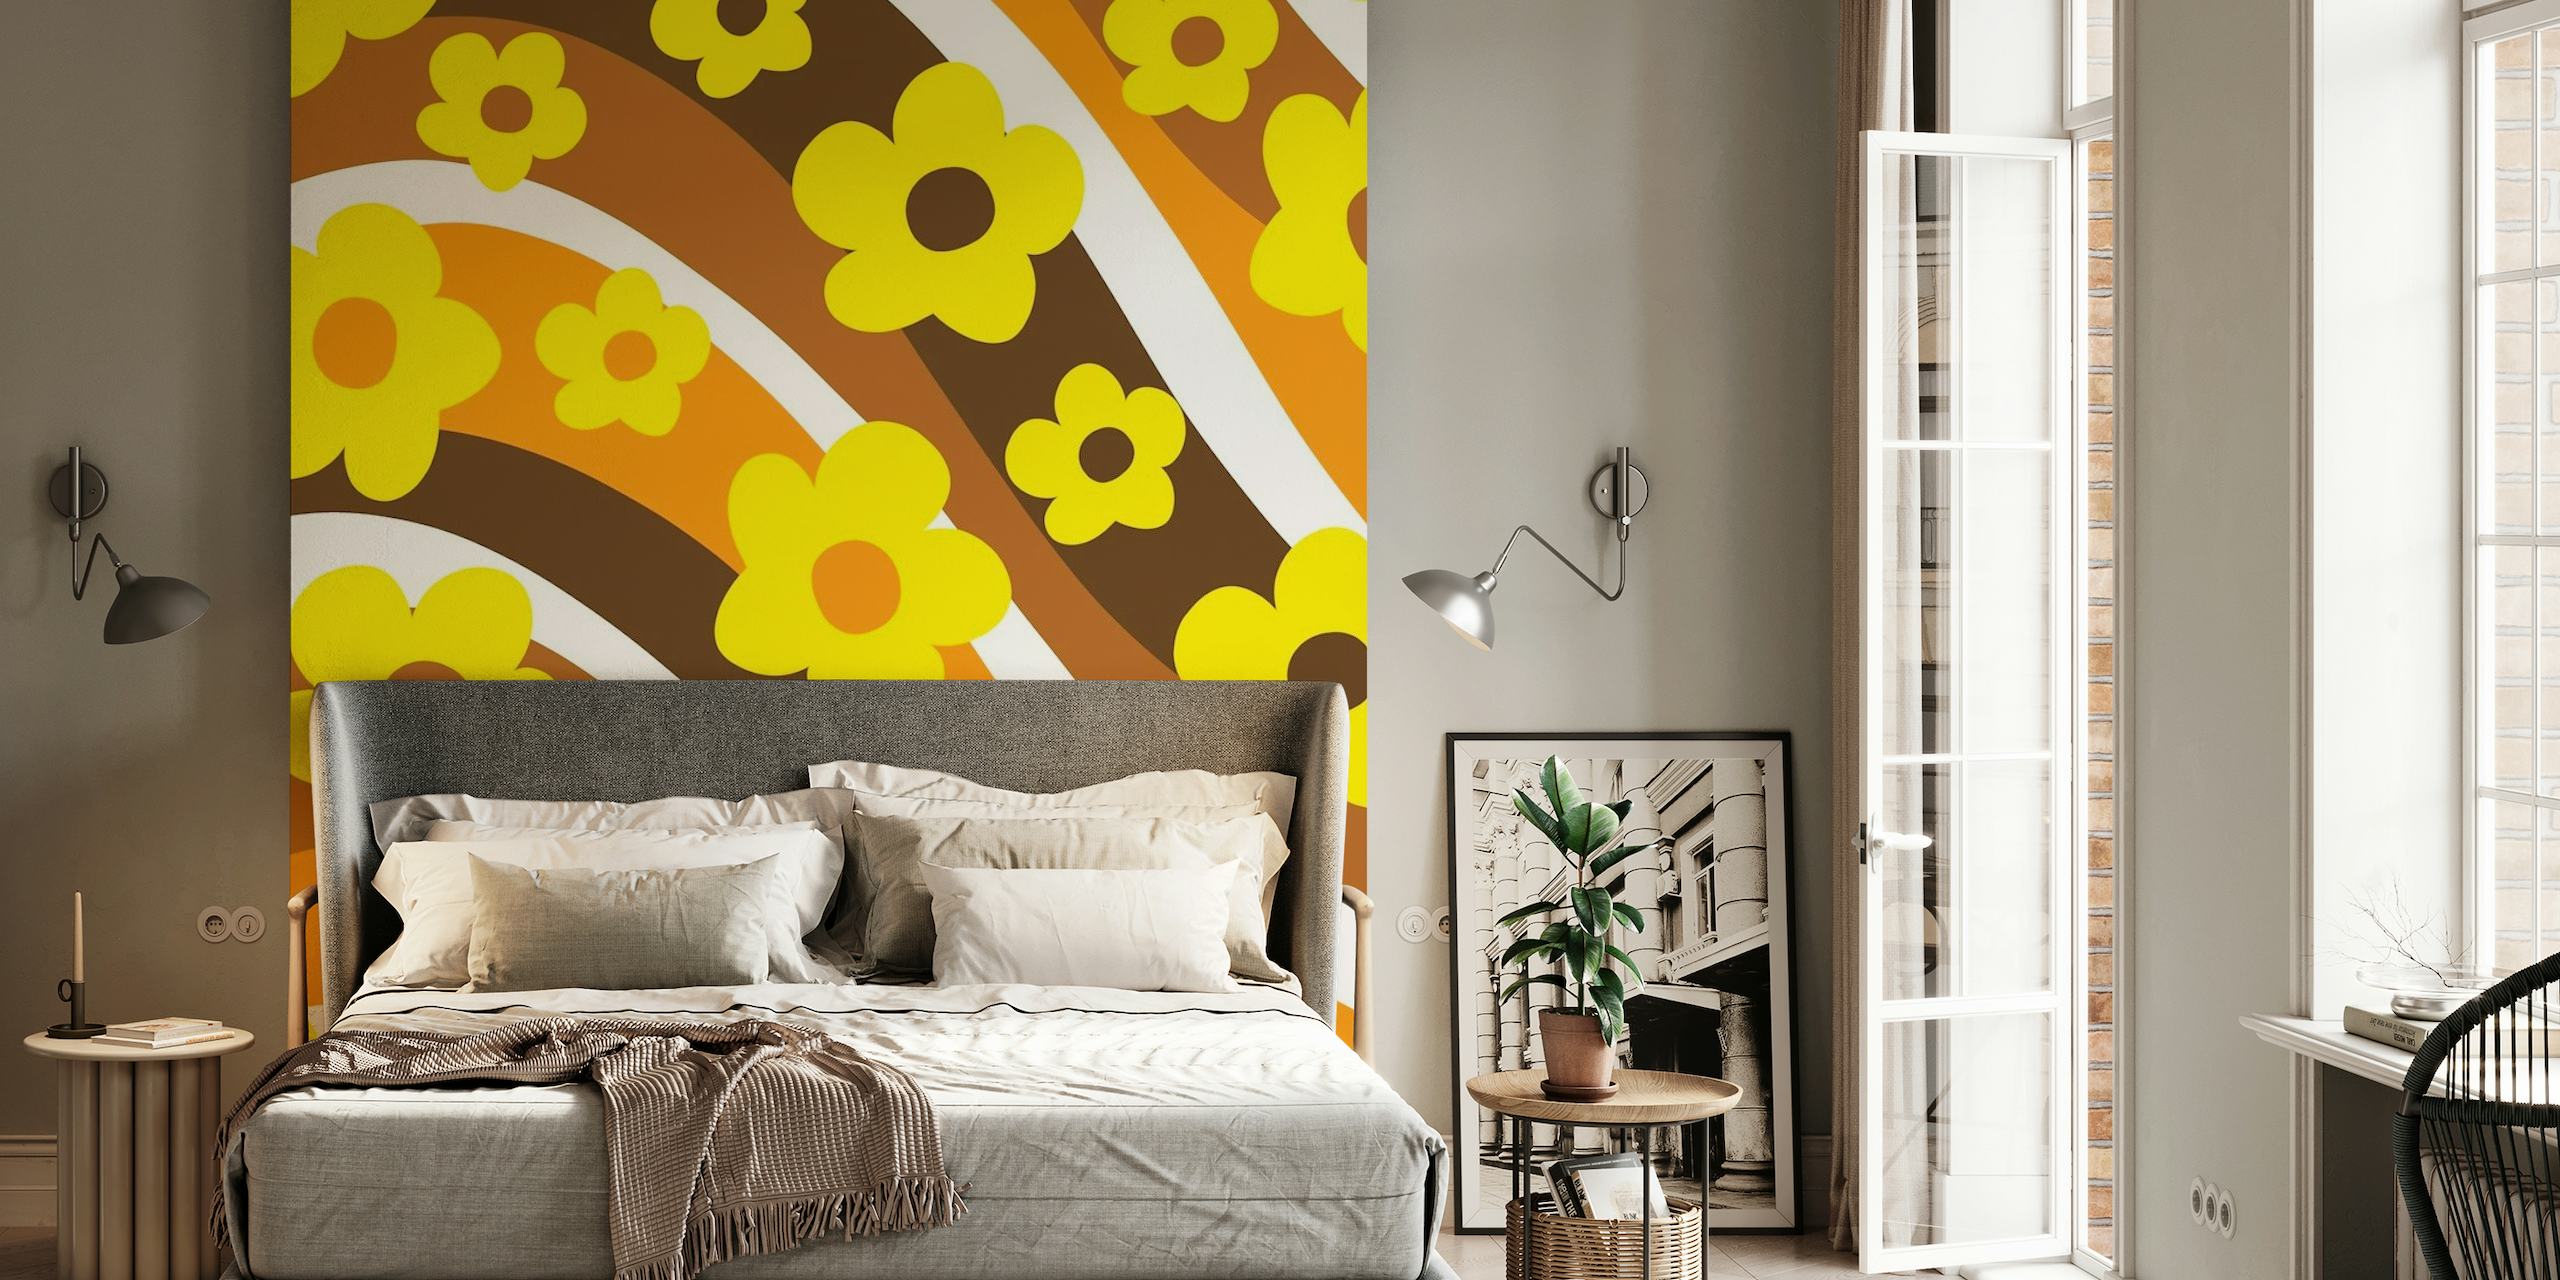 Retro Flower Wave 1 wall mural with yellow flowers and brown orange waves